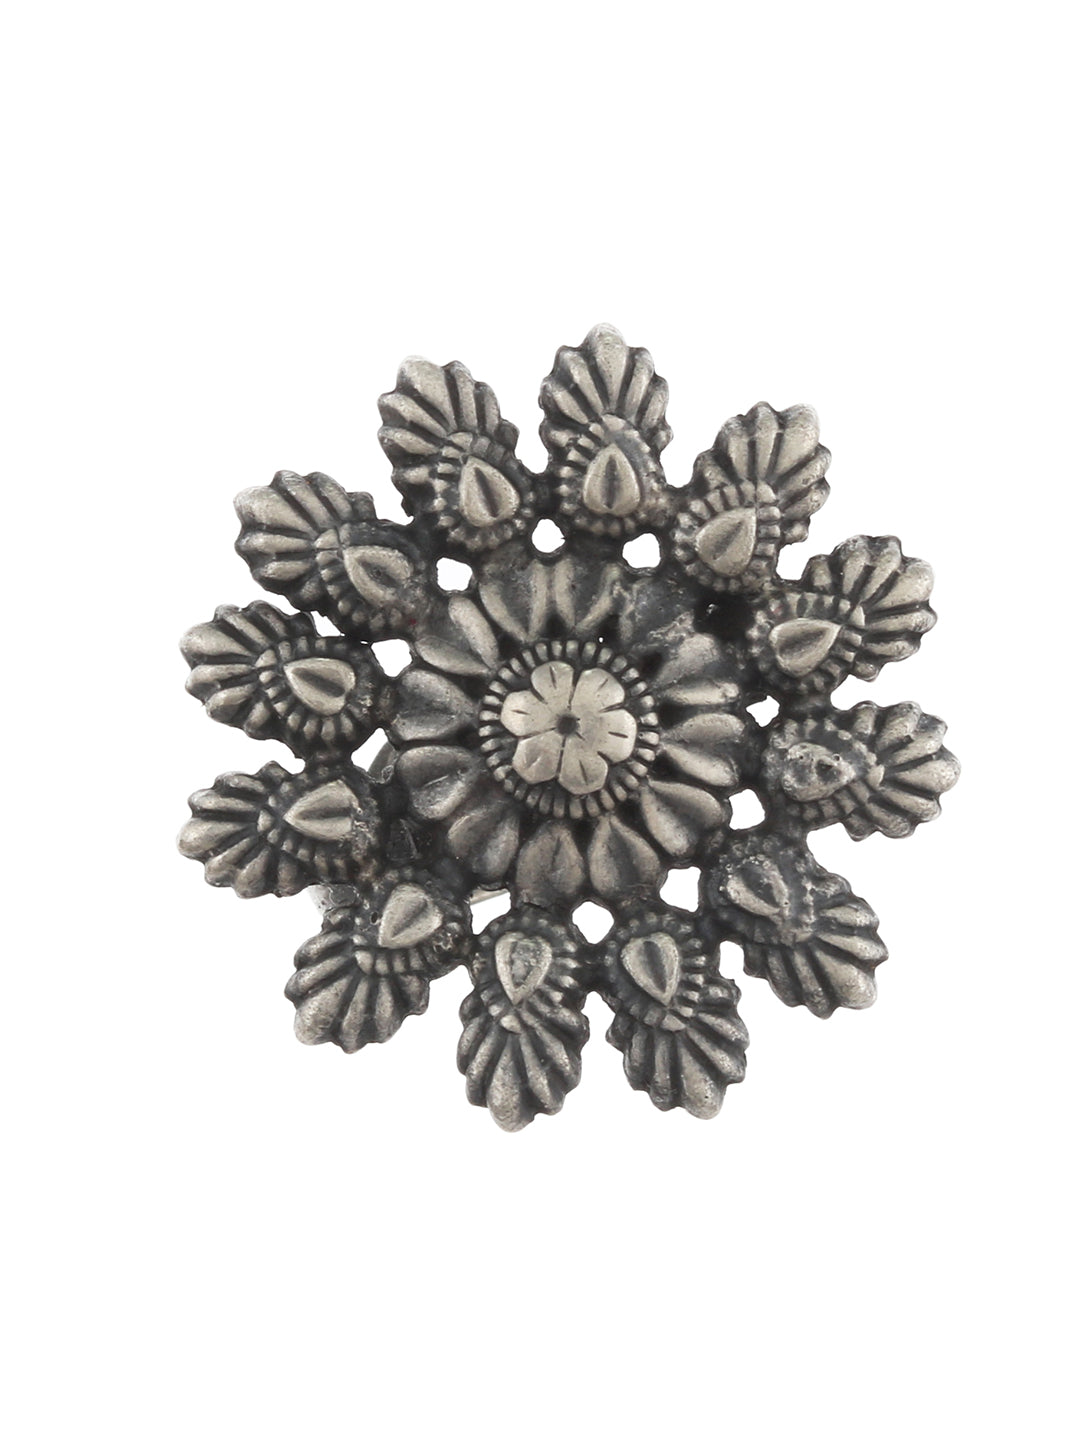 Oxidised Floral Handcrafted 92.5 Sterling Silver Ring